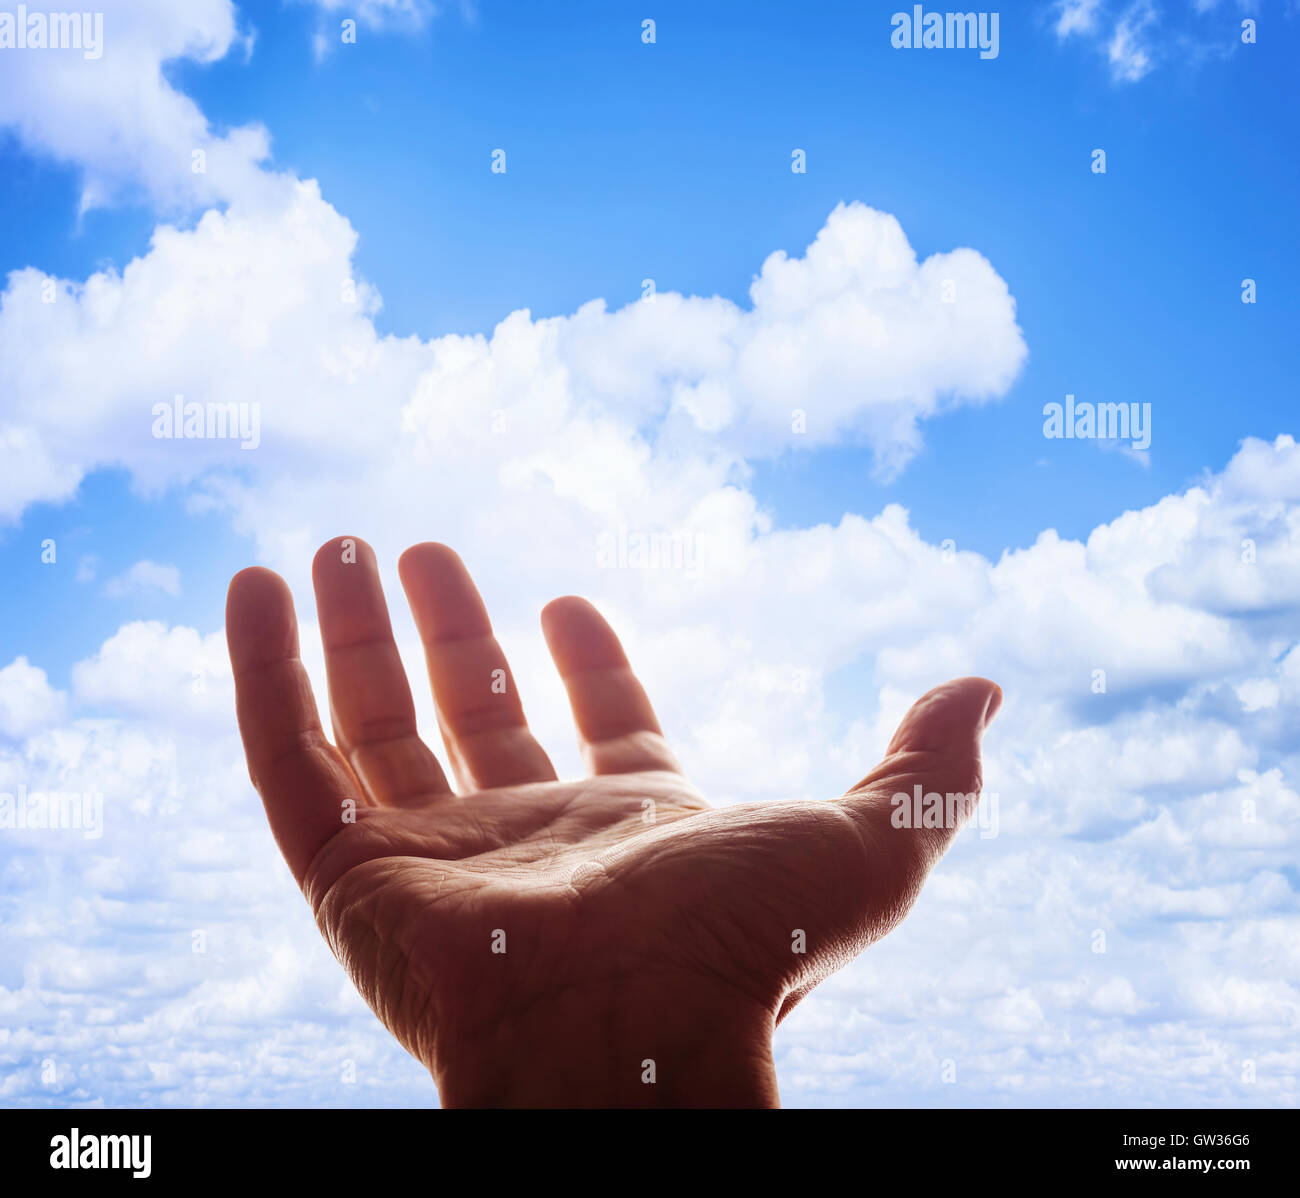 Open hand against blue sky. Stock Photo